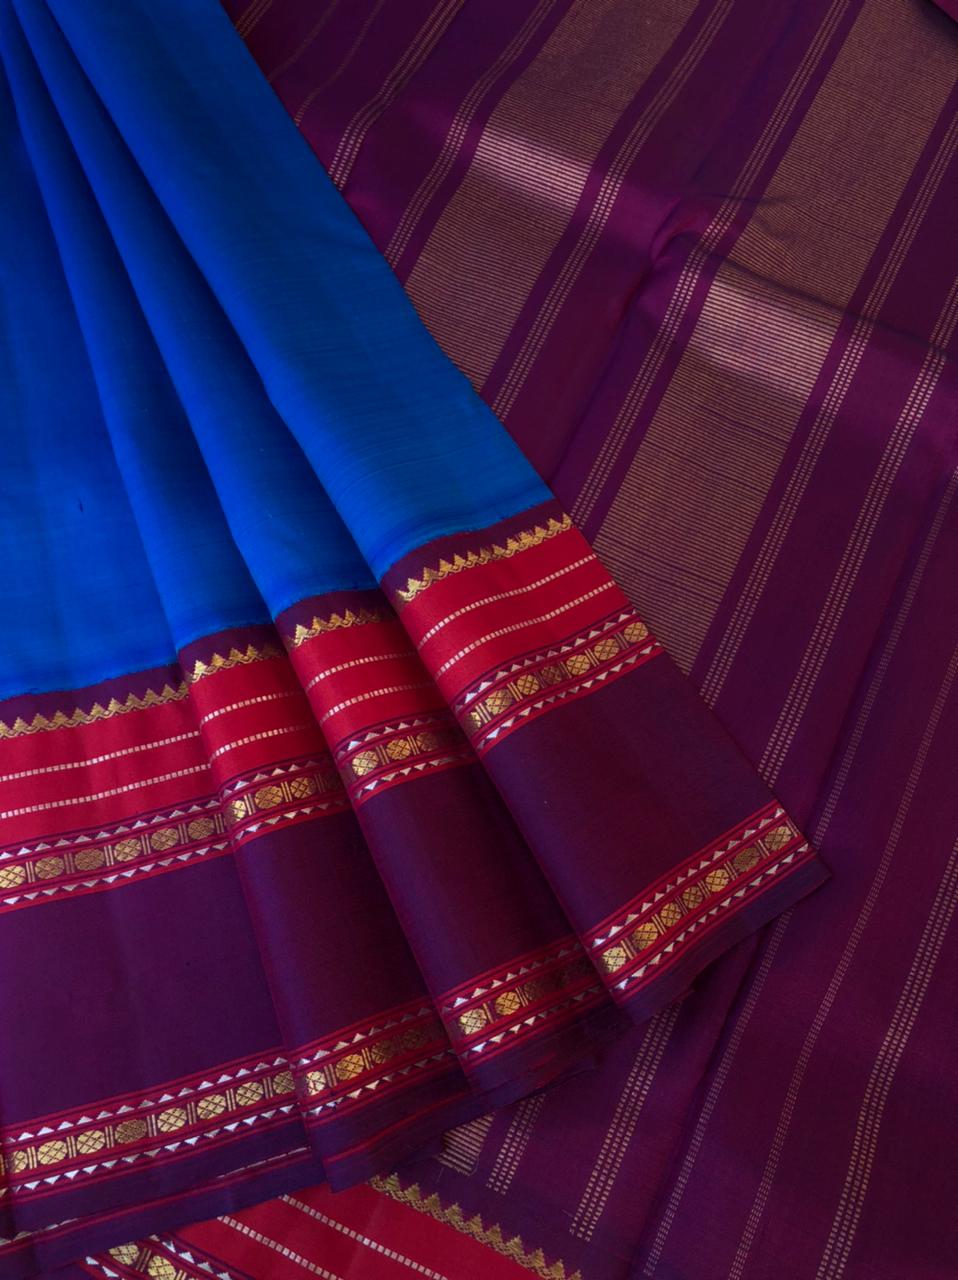 Varam - Kanchivarams Inspired from our Grandmother’s Trunk - beautiful Deep Pepsi can blue and deep purple with moppula woven borders